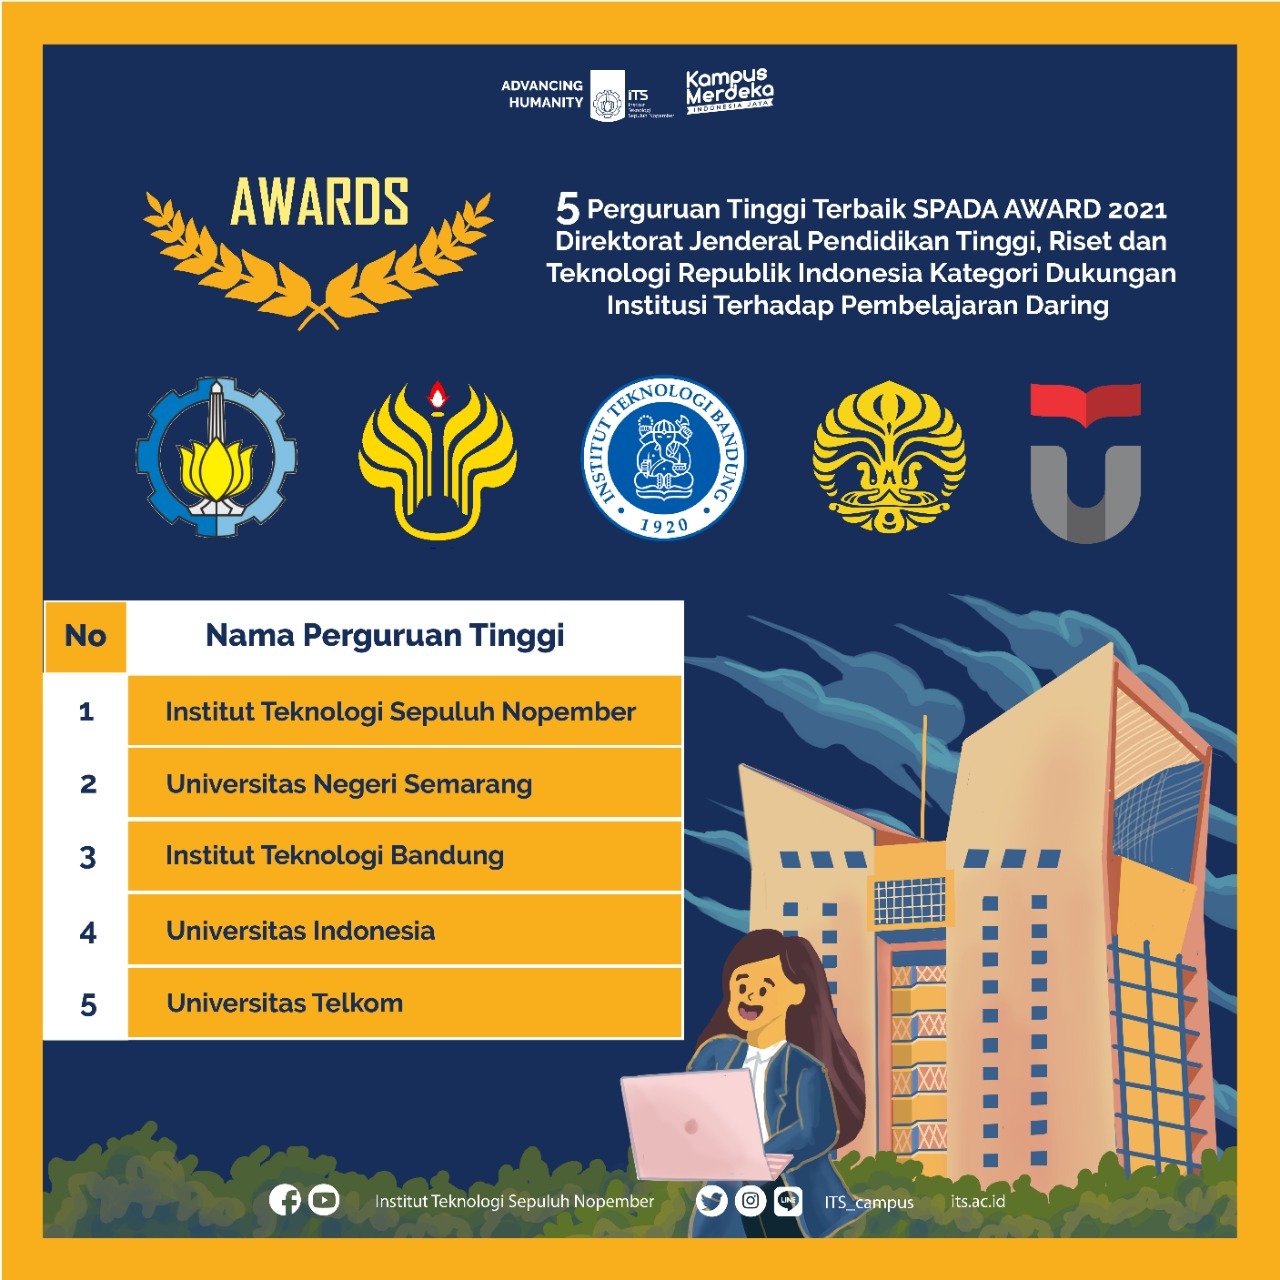 Sepuluh Nopember Institute of Technology (ITS) became the second-best university that supports online learning at the 2021 SPADA Award.